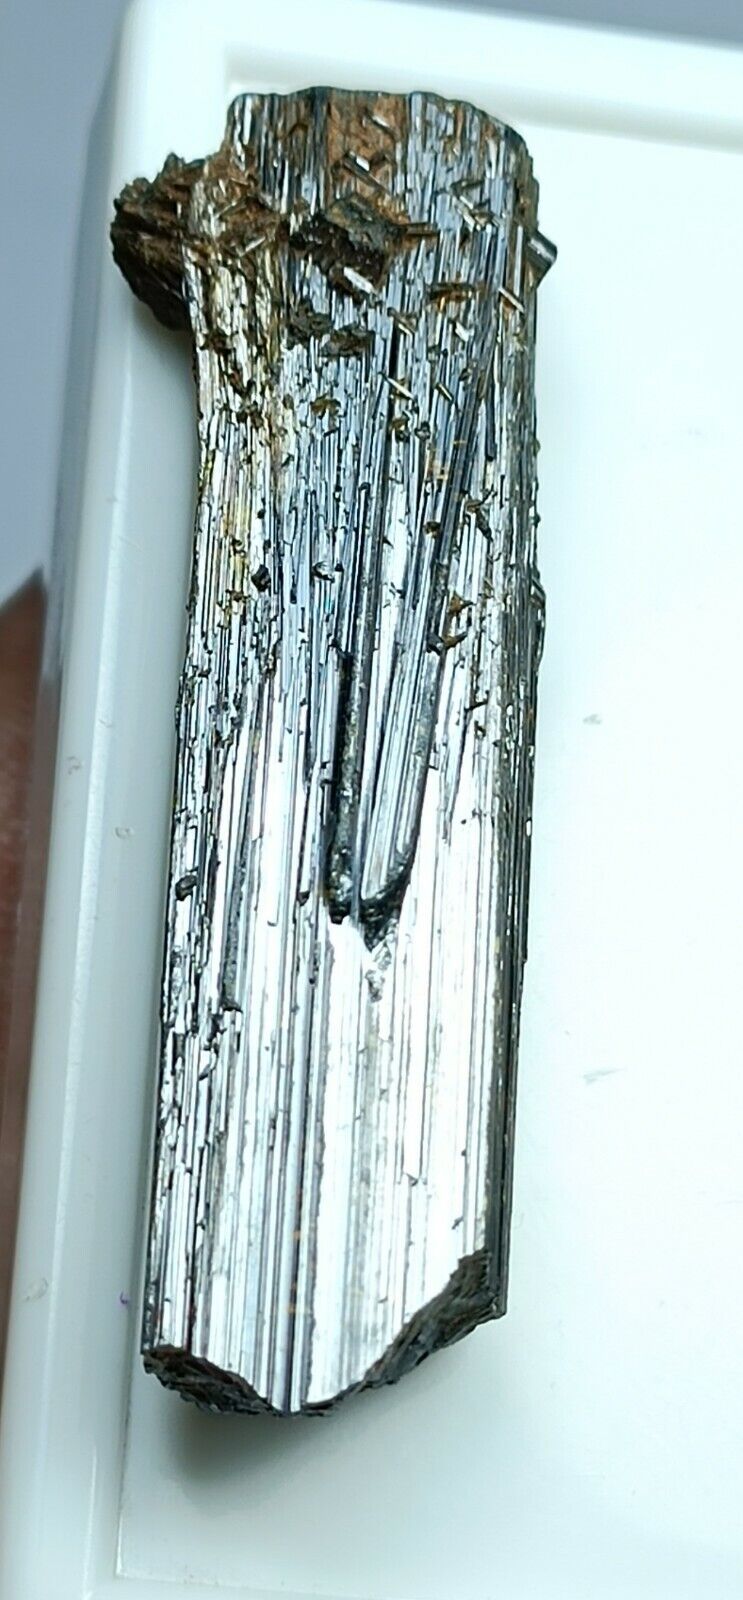 14.5g Large Rutile Crystal, best for collection. 45x15 mms (lxw)- Pakistan